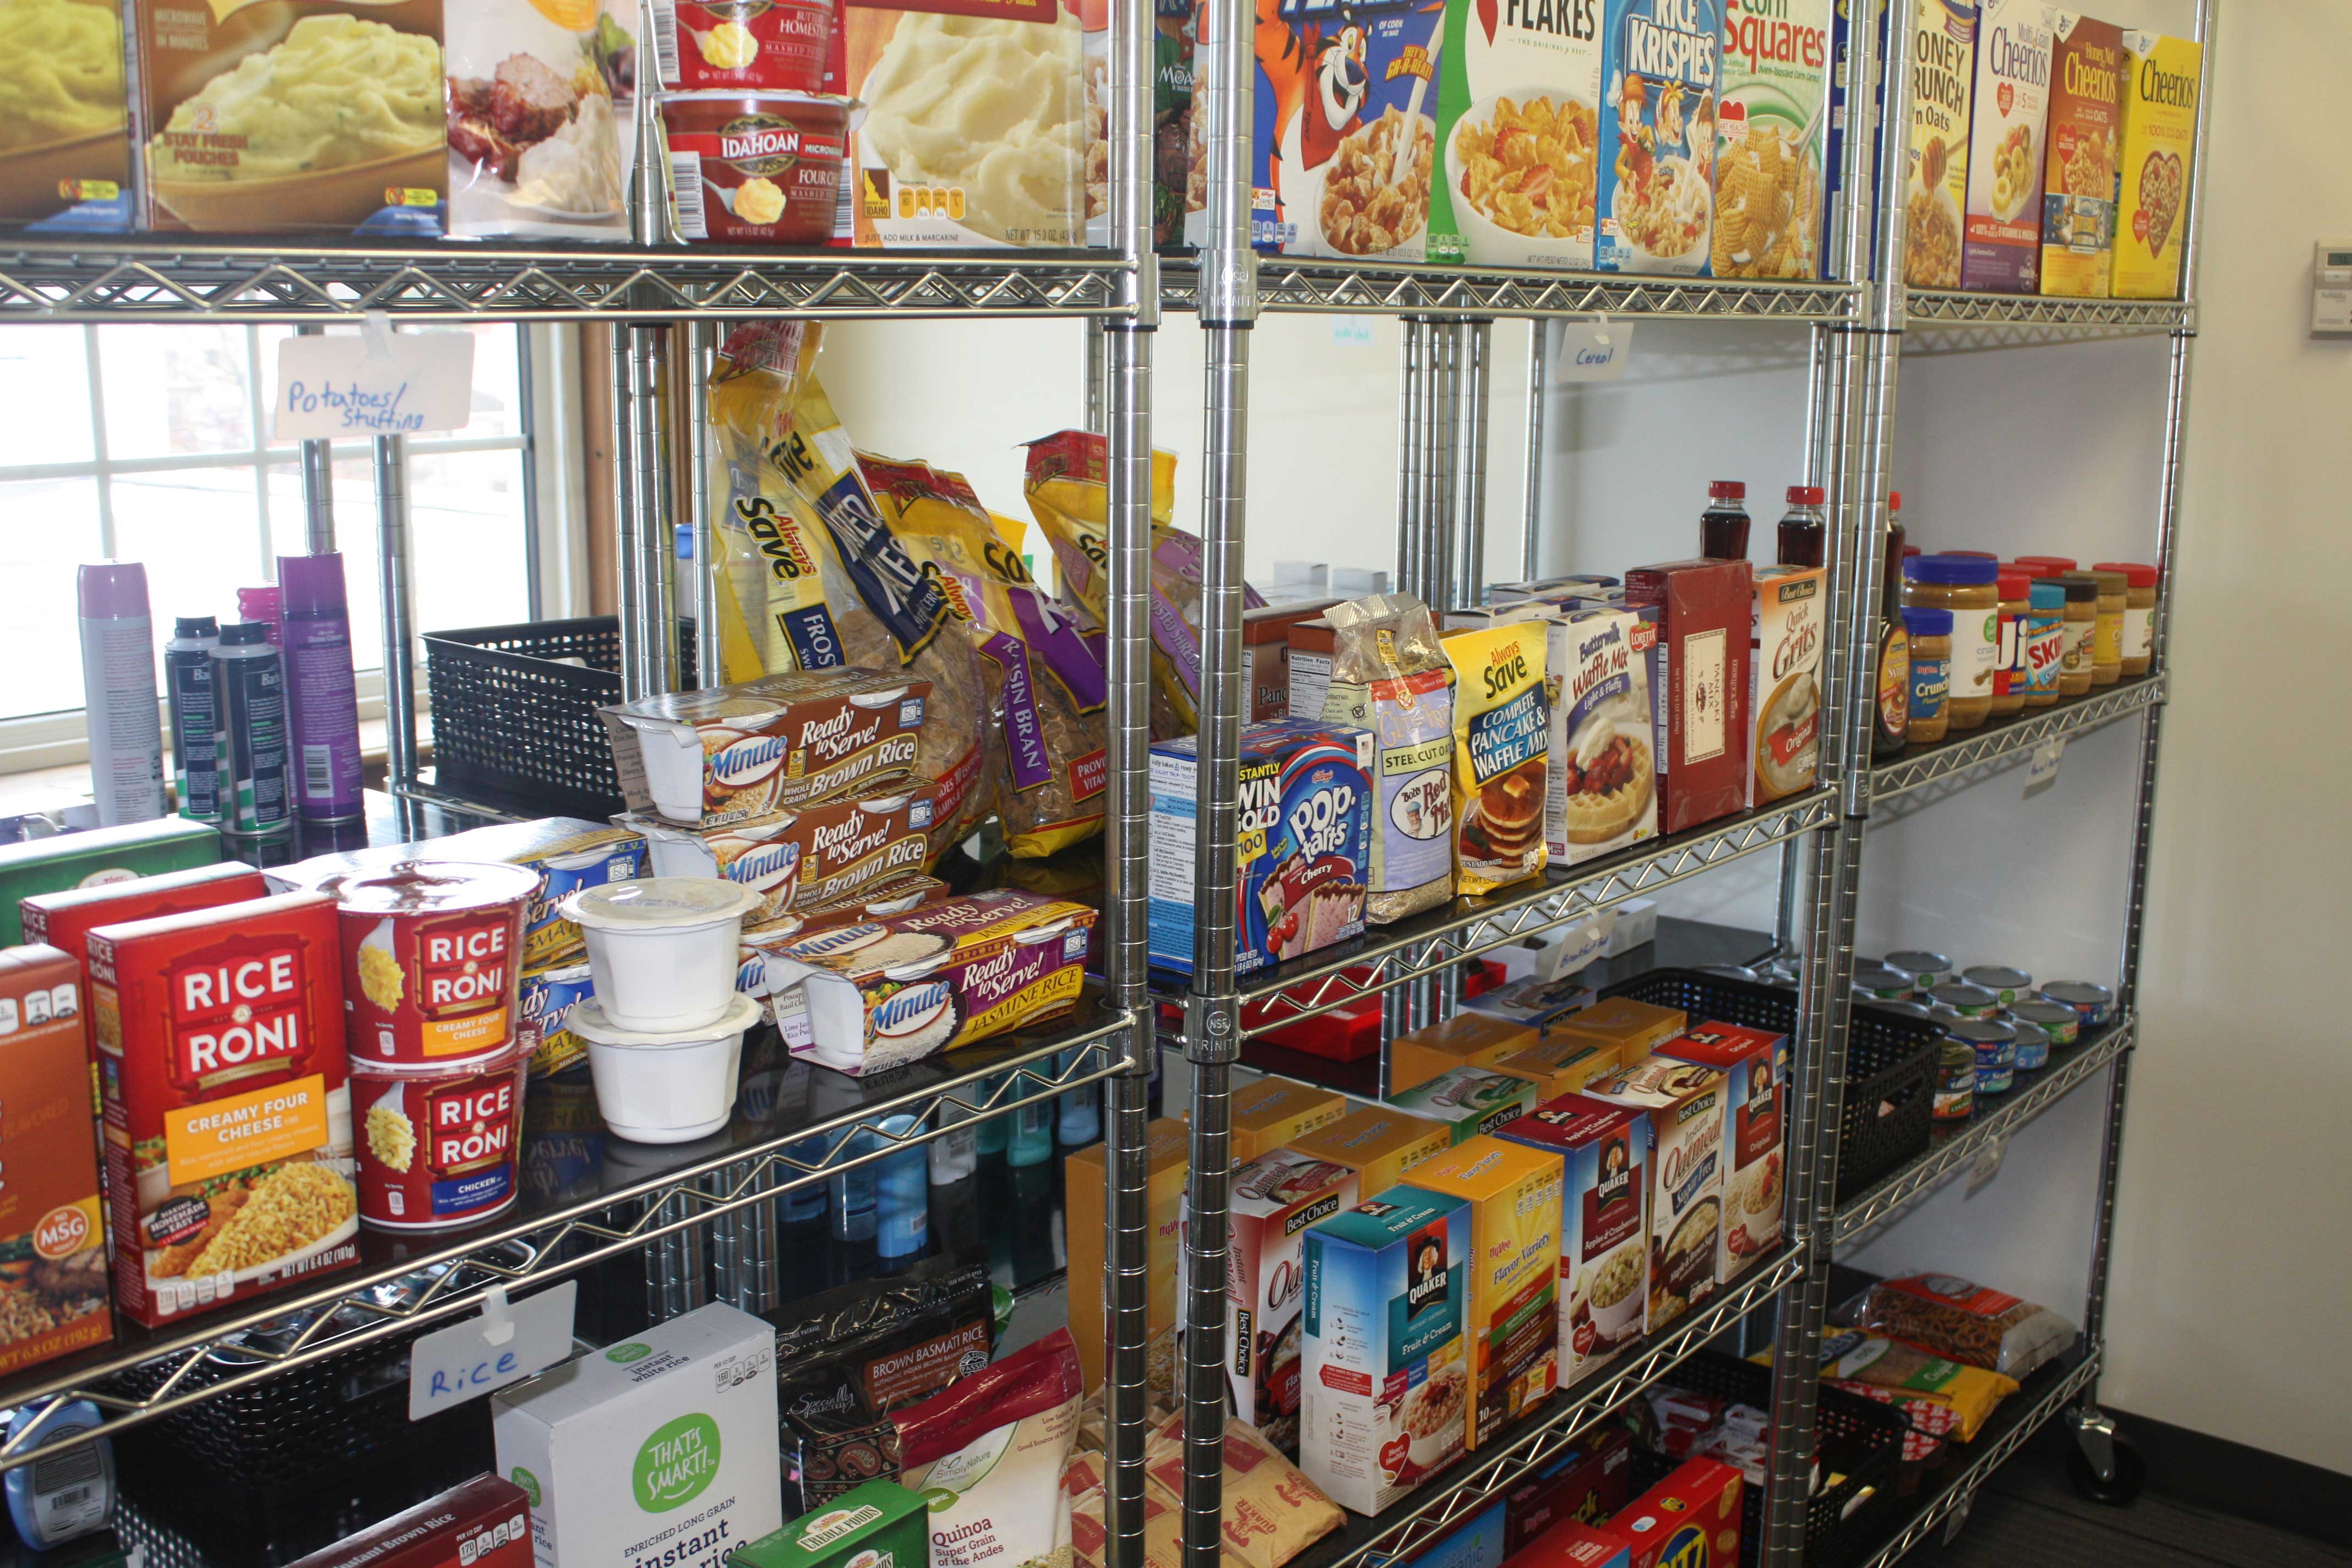 The pantry shelves were fully stocked and ready to assist students at the grand opening in January.